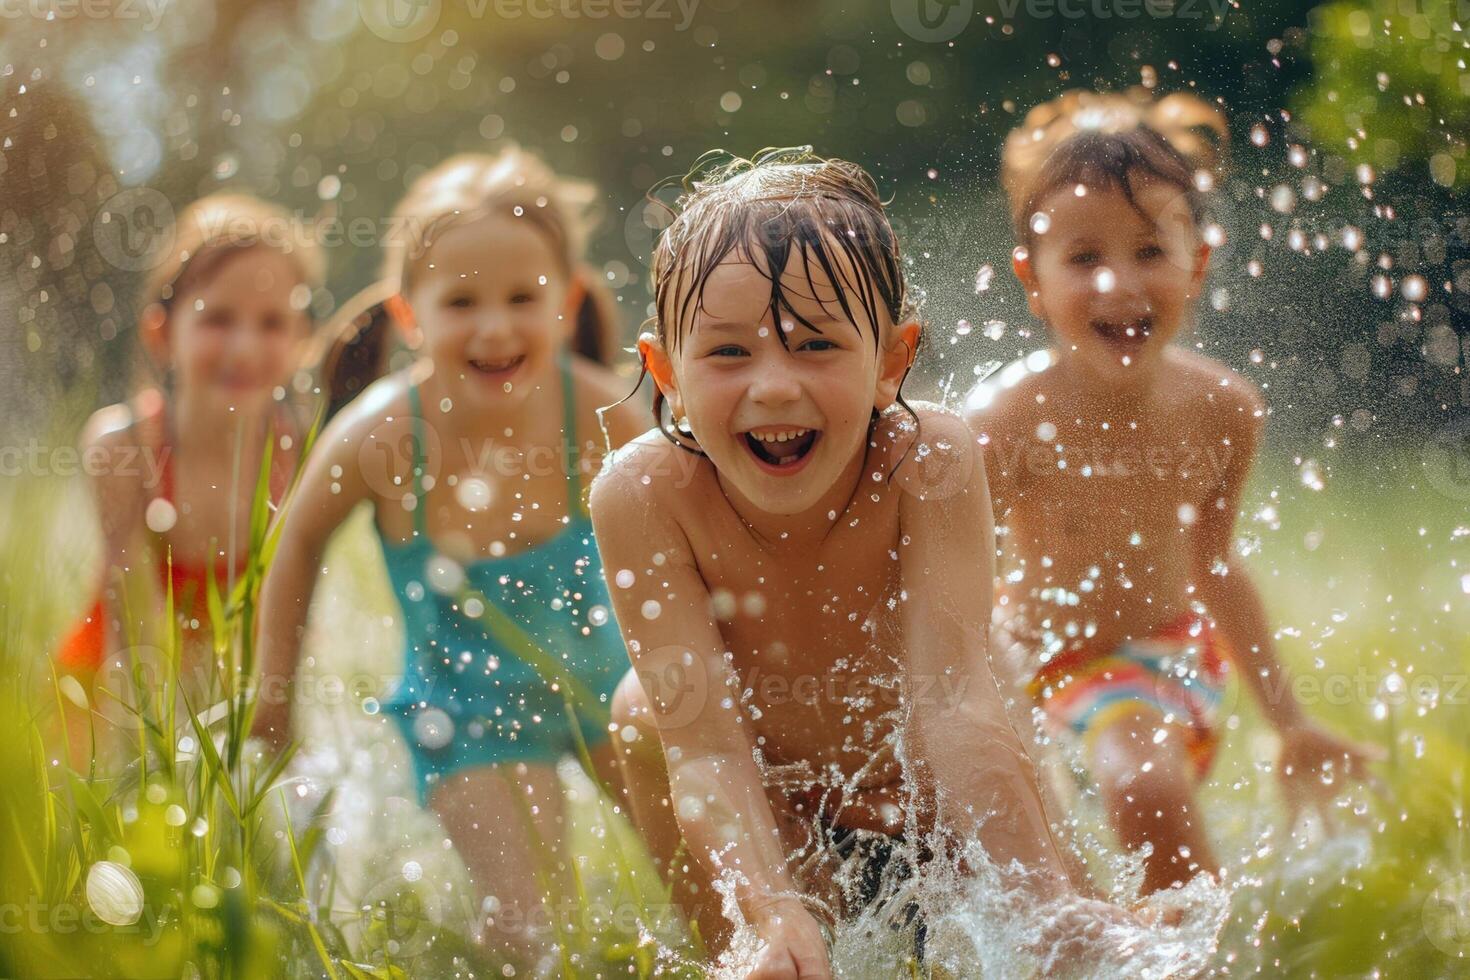 Group of children playing in a sprinkler to escape the heat, joyful splashing on a hot day photo